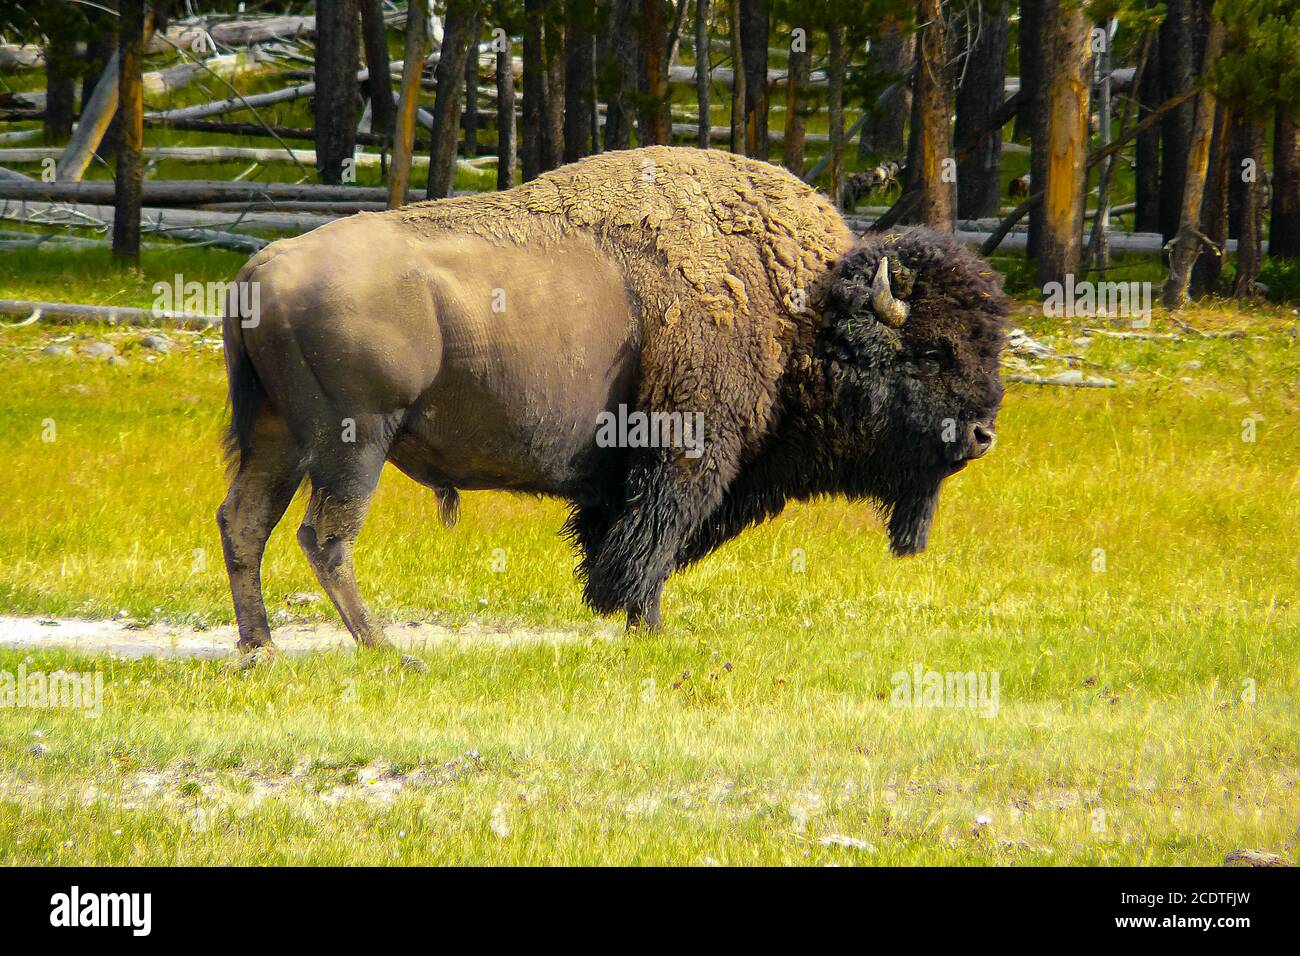 American bison in nature Stock Photo